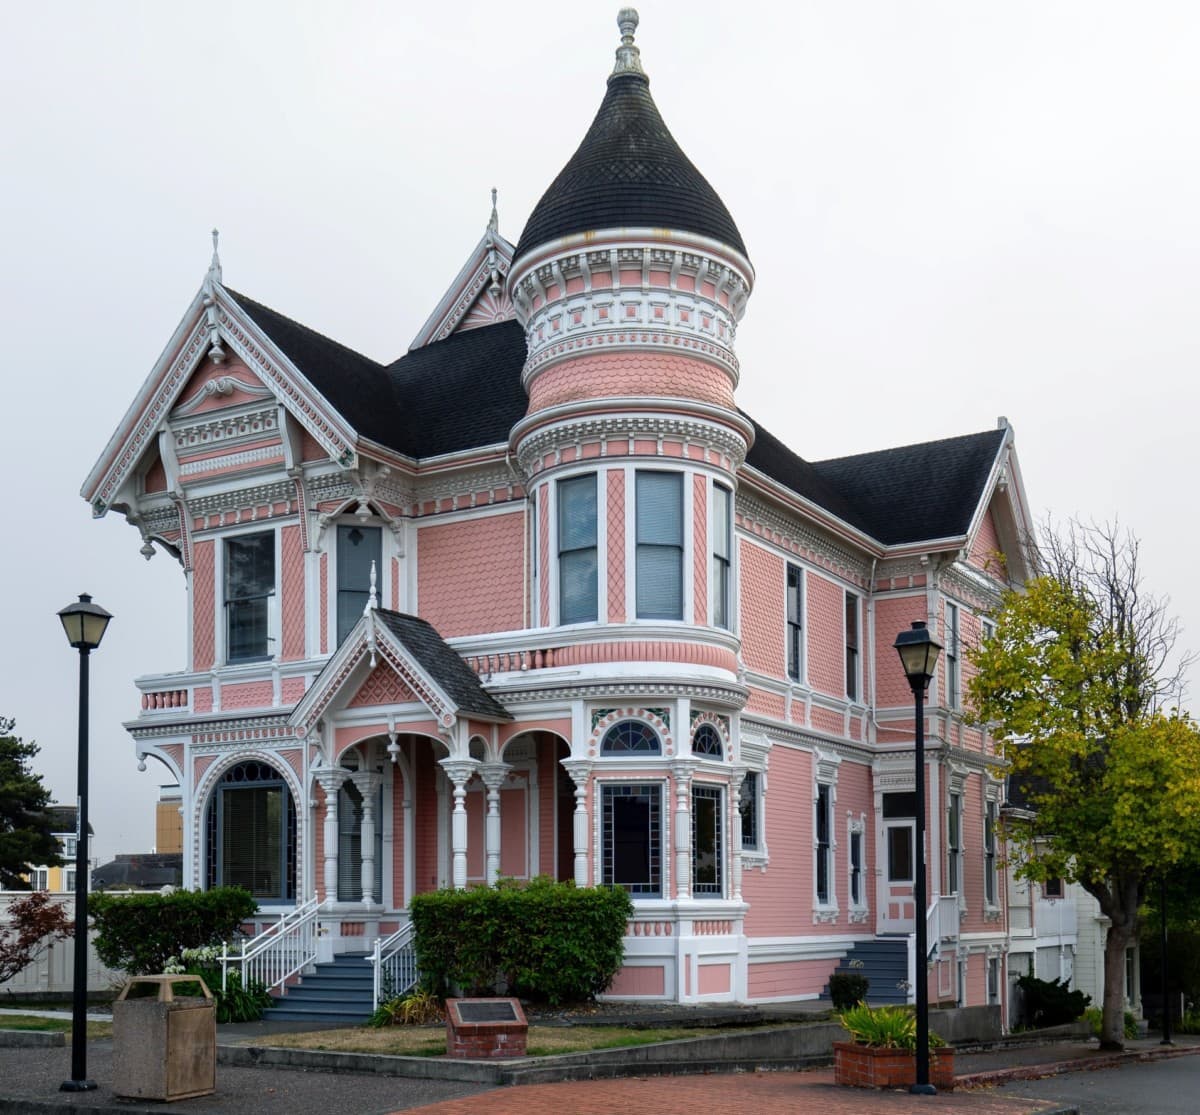 Two-story, pink victorian style home with white trim and round tower